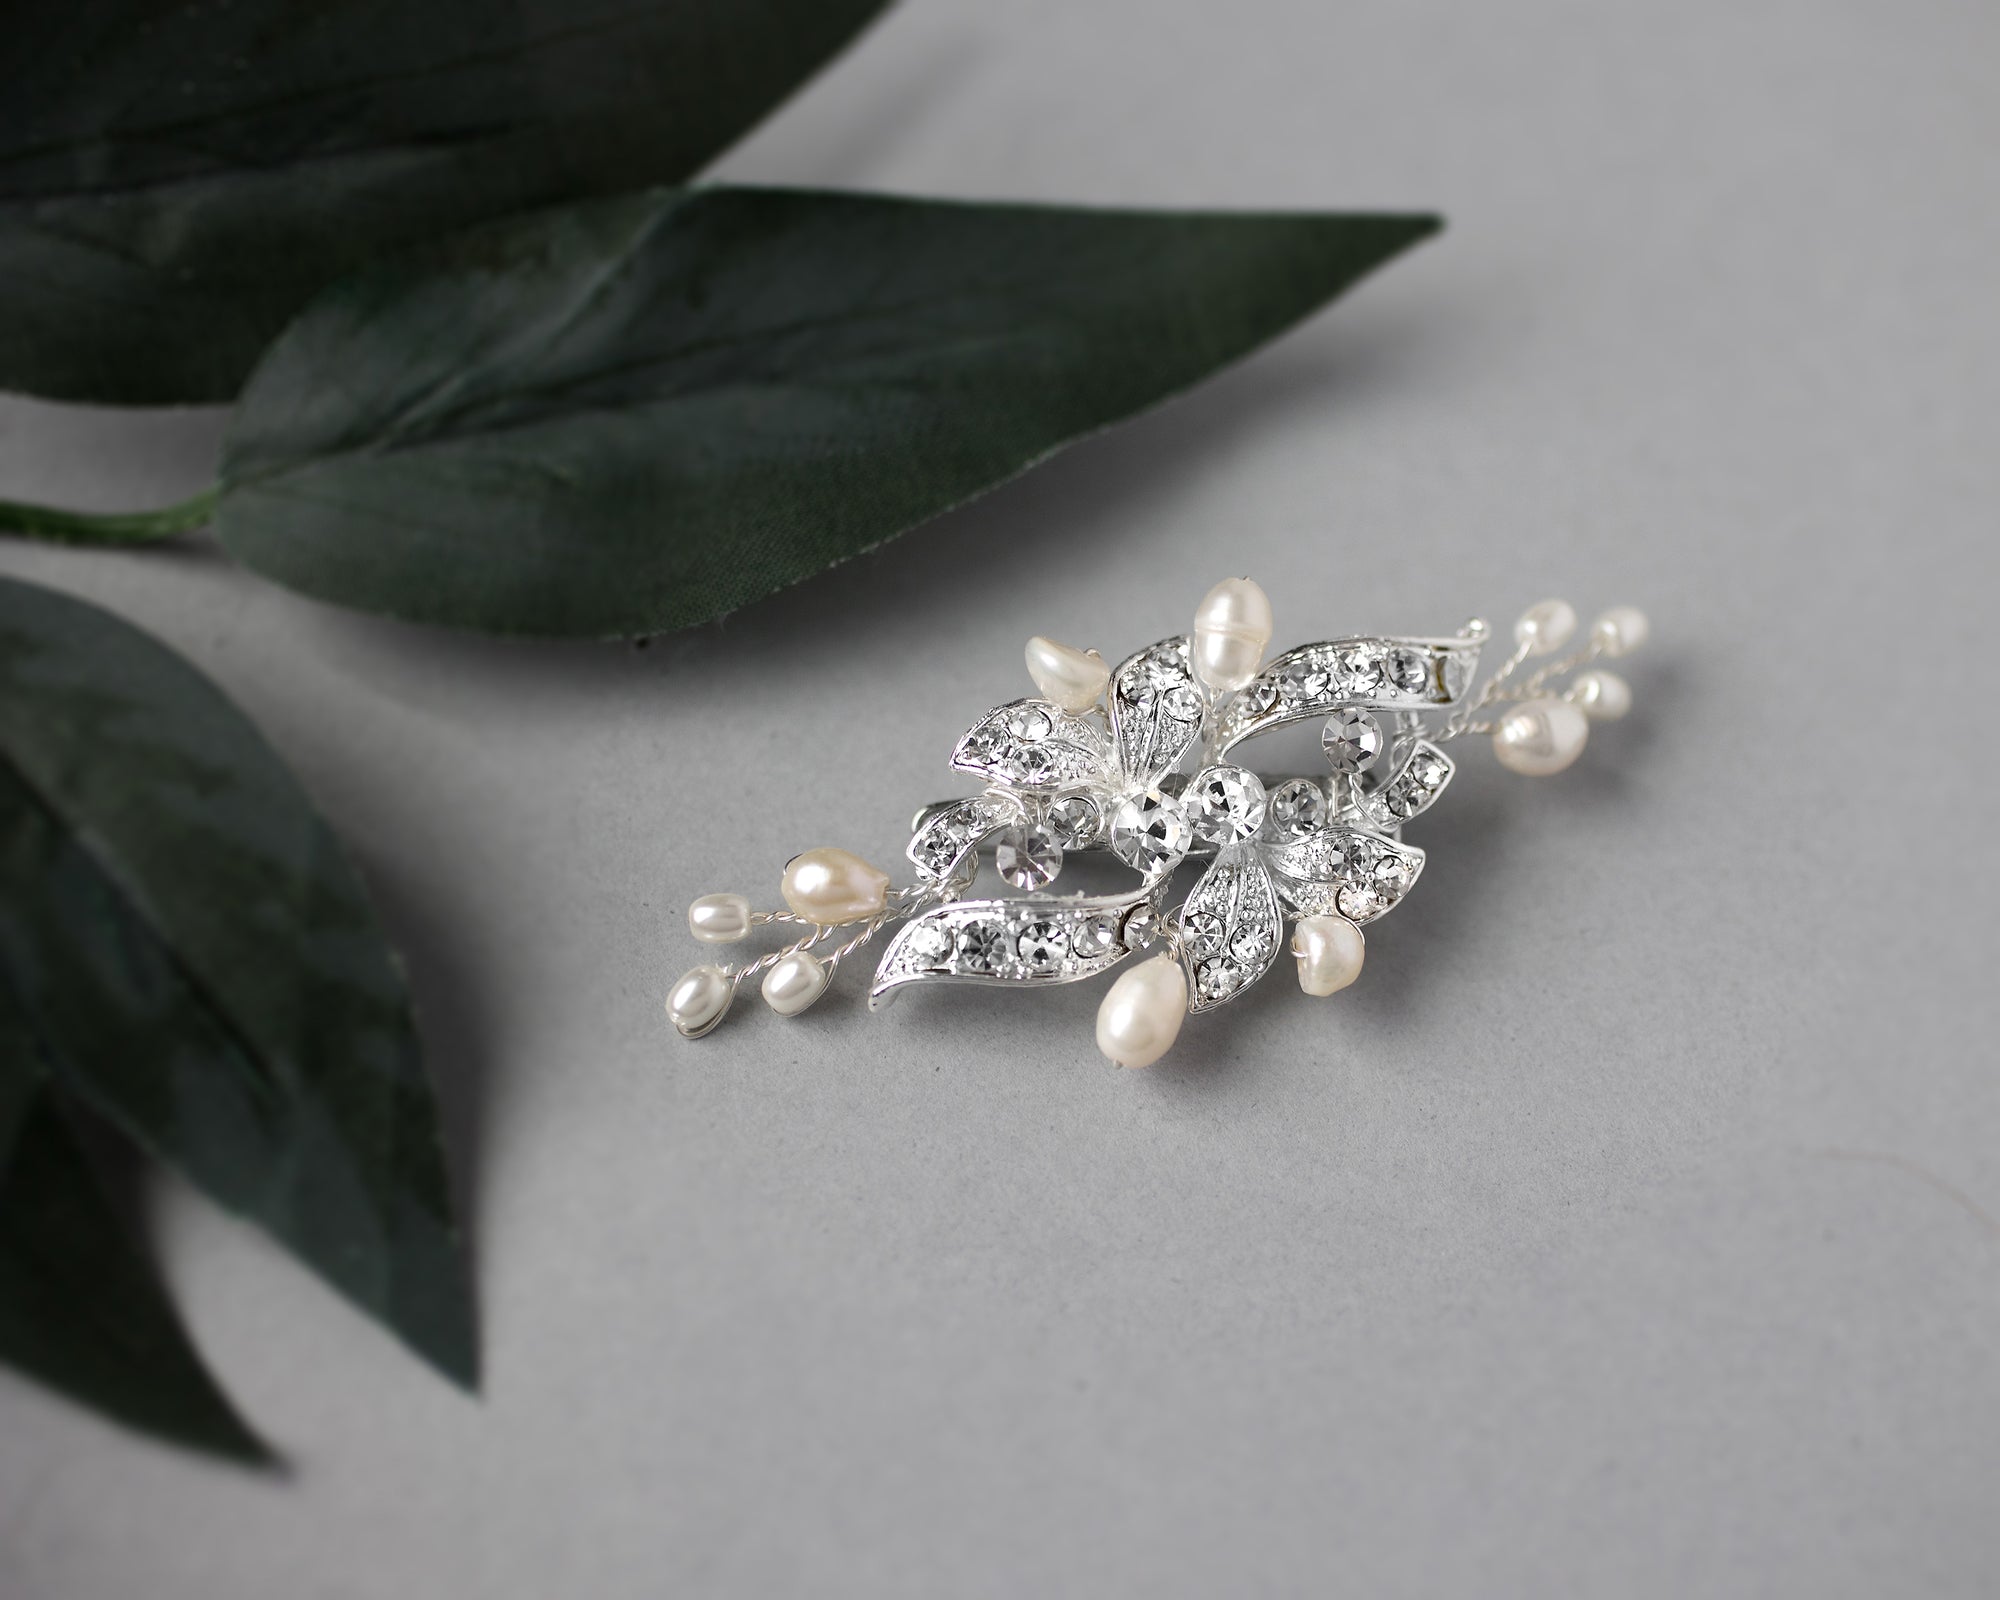 Small Crystal and Pearl Floral Hair Barrette - Cassandra Lynne